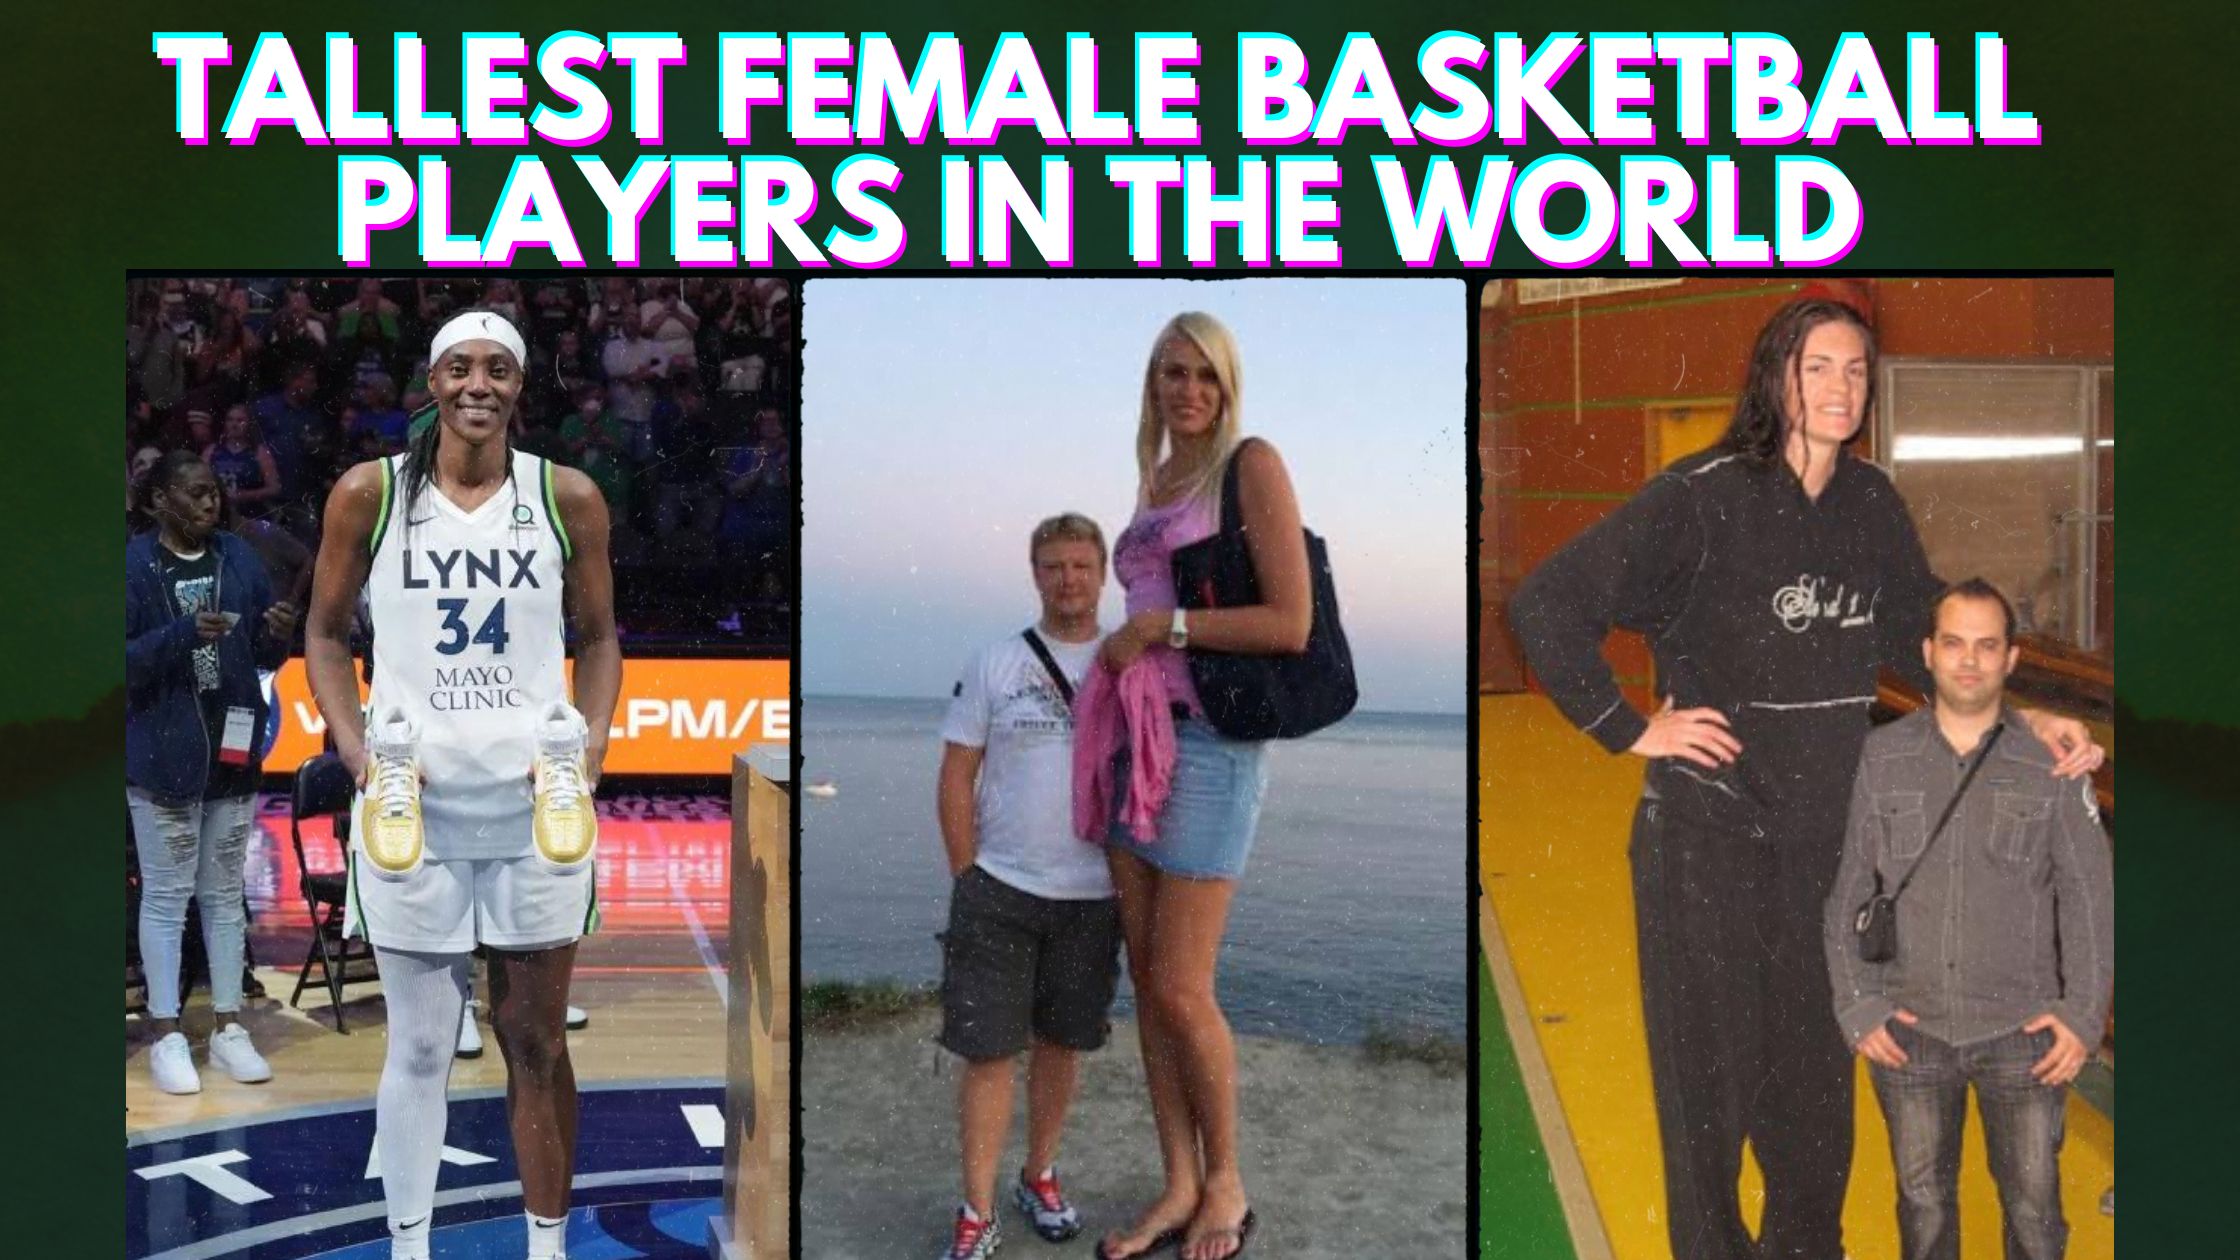 Tallest Female Basketball Players in the World